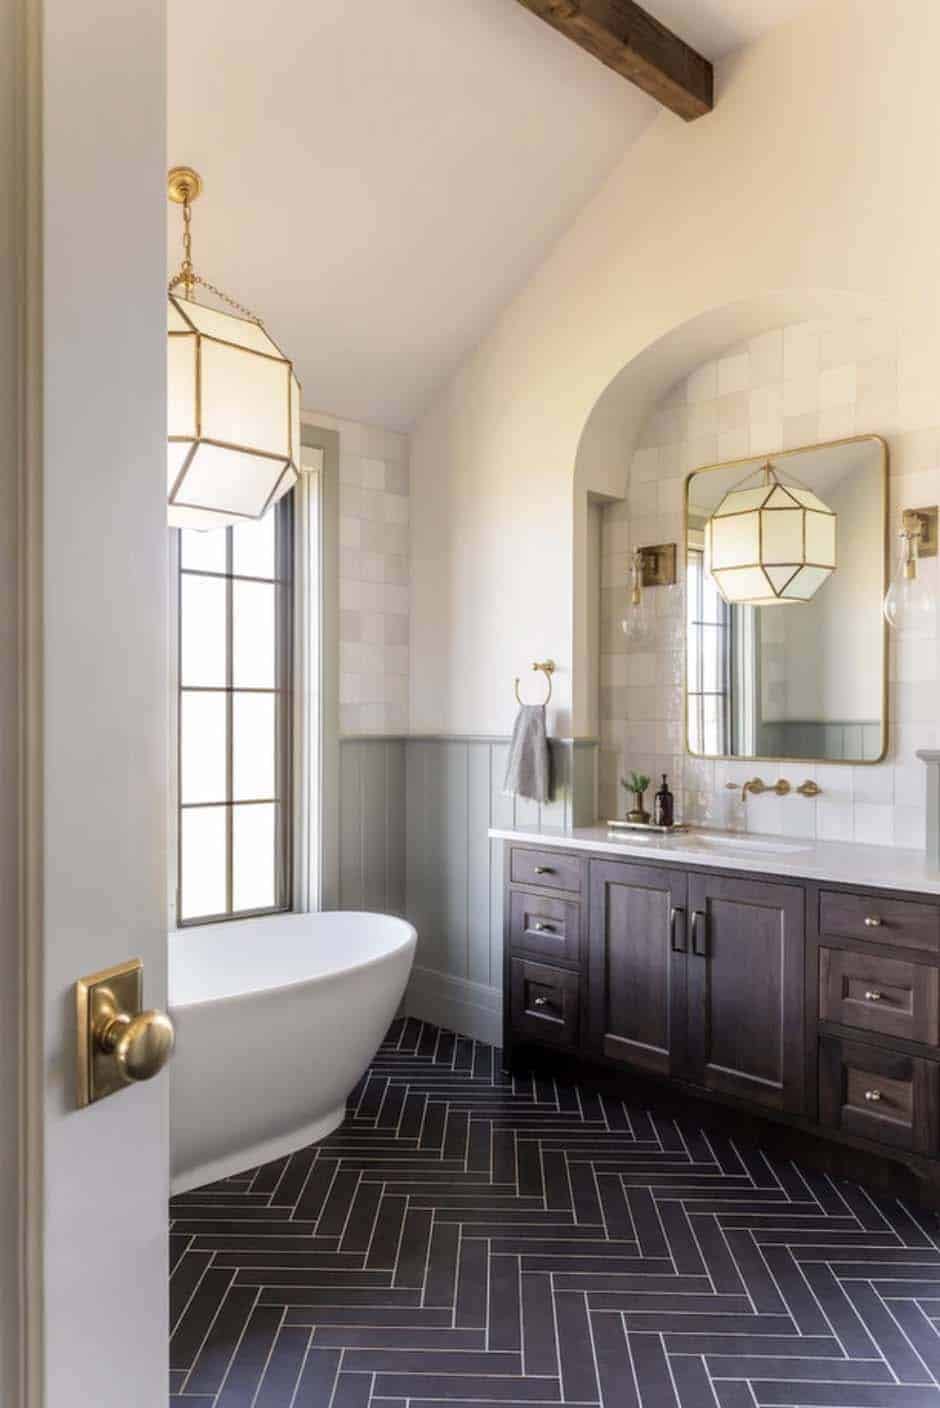 English country style bathroom with a vanity and freestanding tub